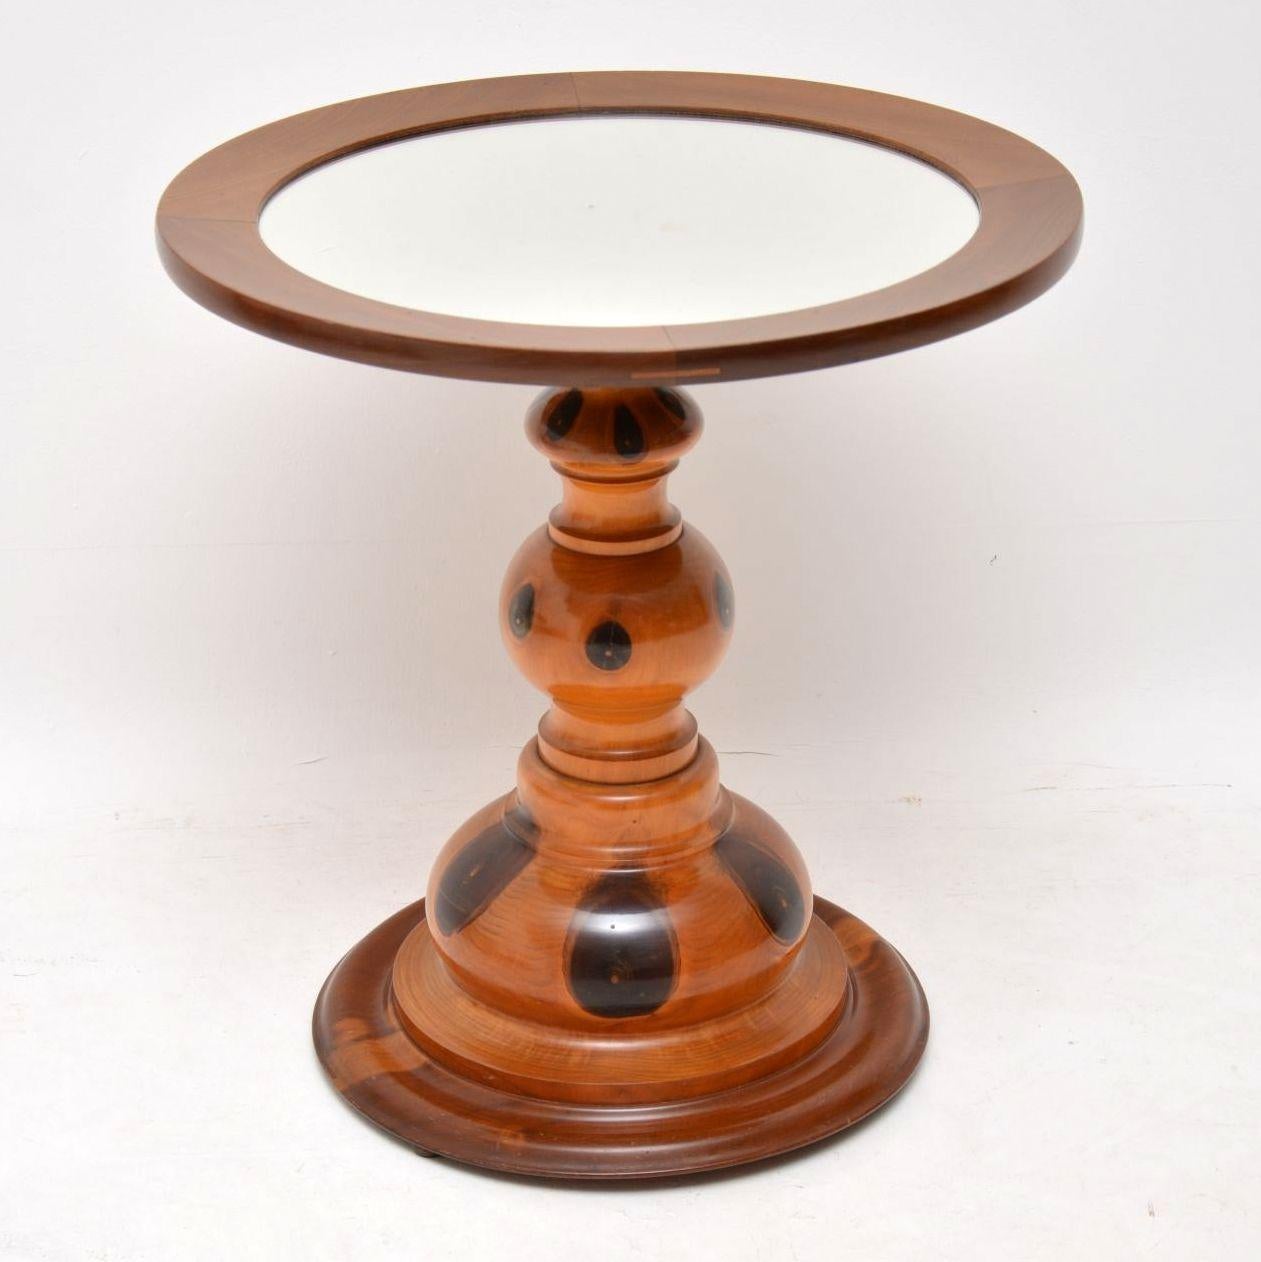 This antique occasional table is made from a very unusual wood, which I can’t quite figure out. I think it could olive wood, but whatever it is, it has some very distinct figuring in the wood.

This table has an inset mirror on the top and a